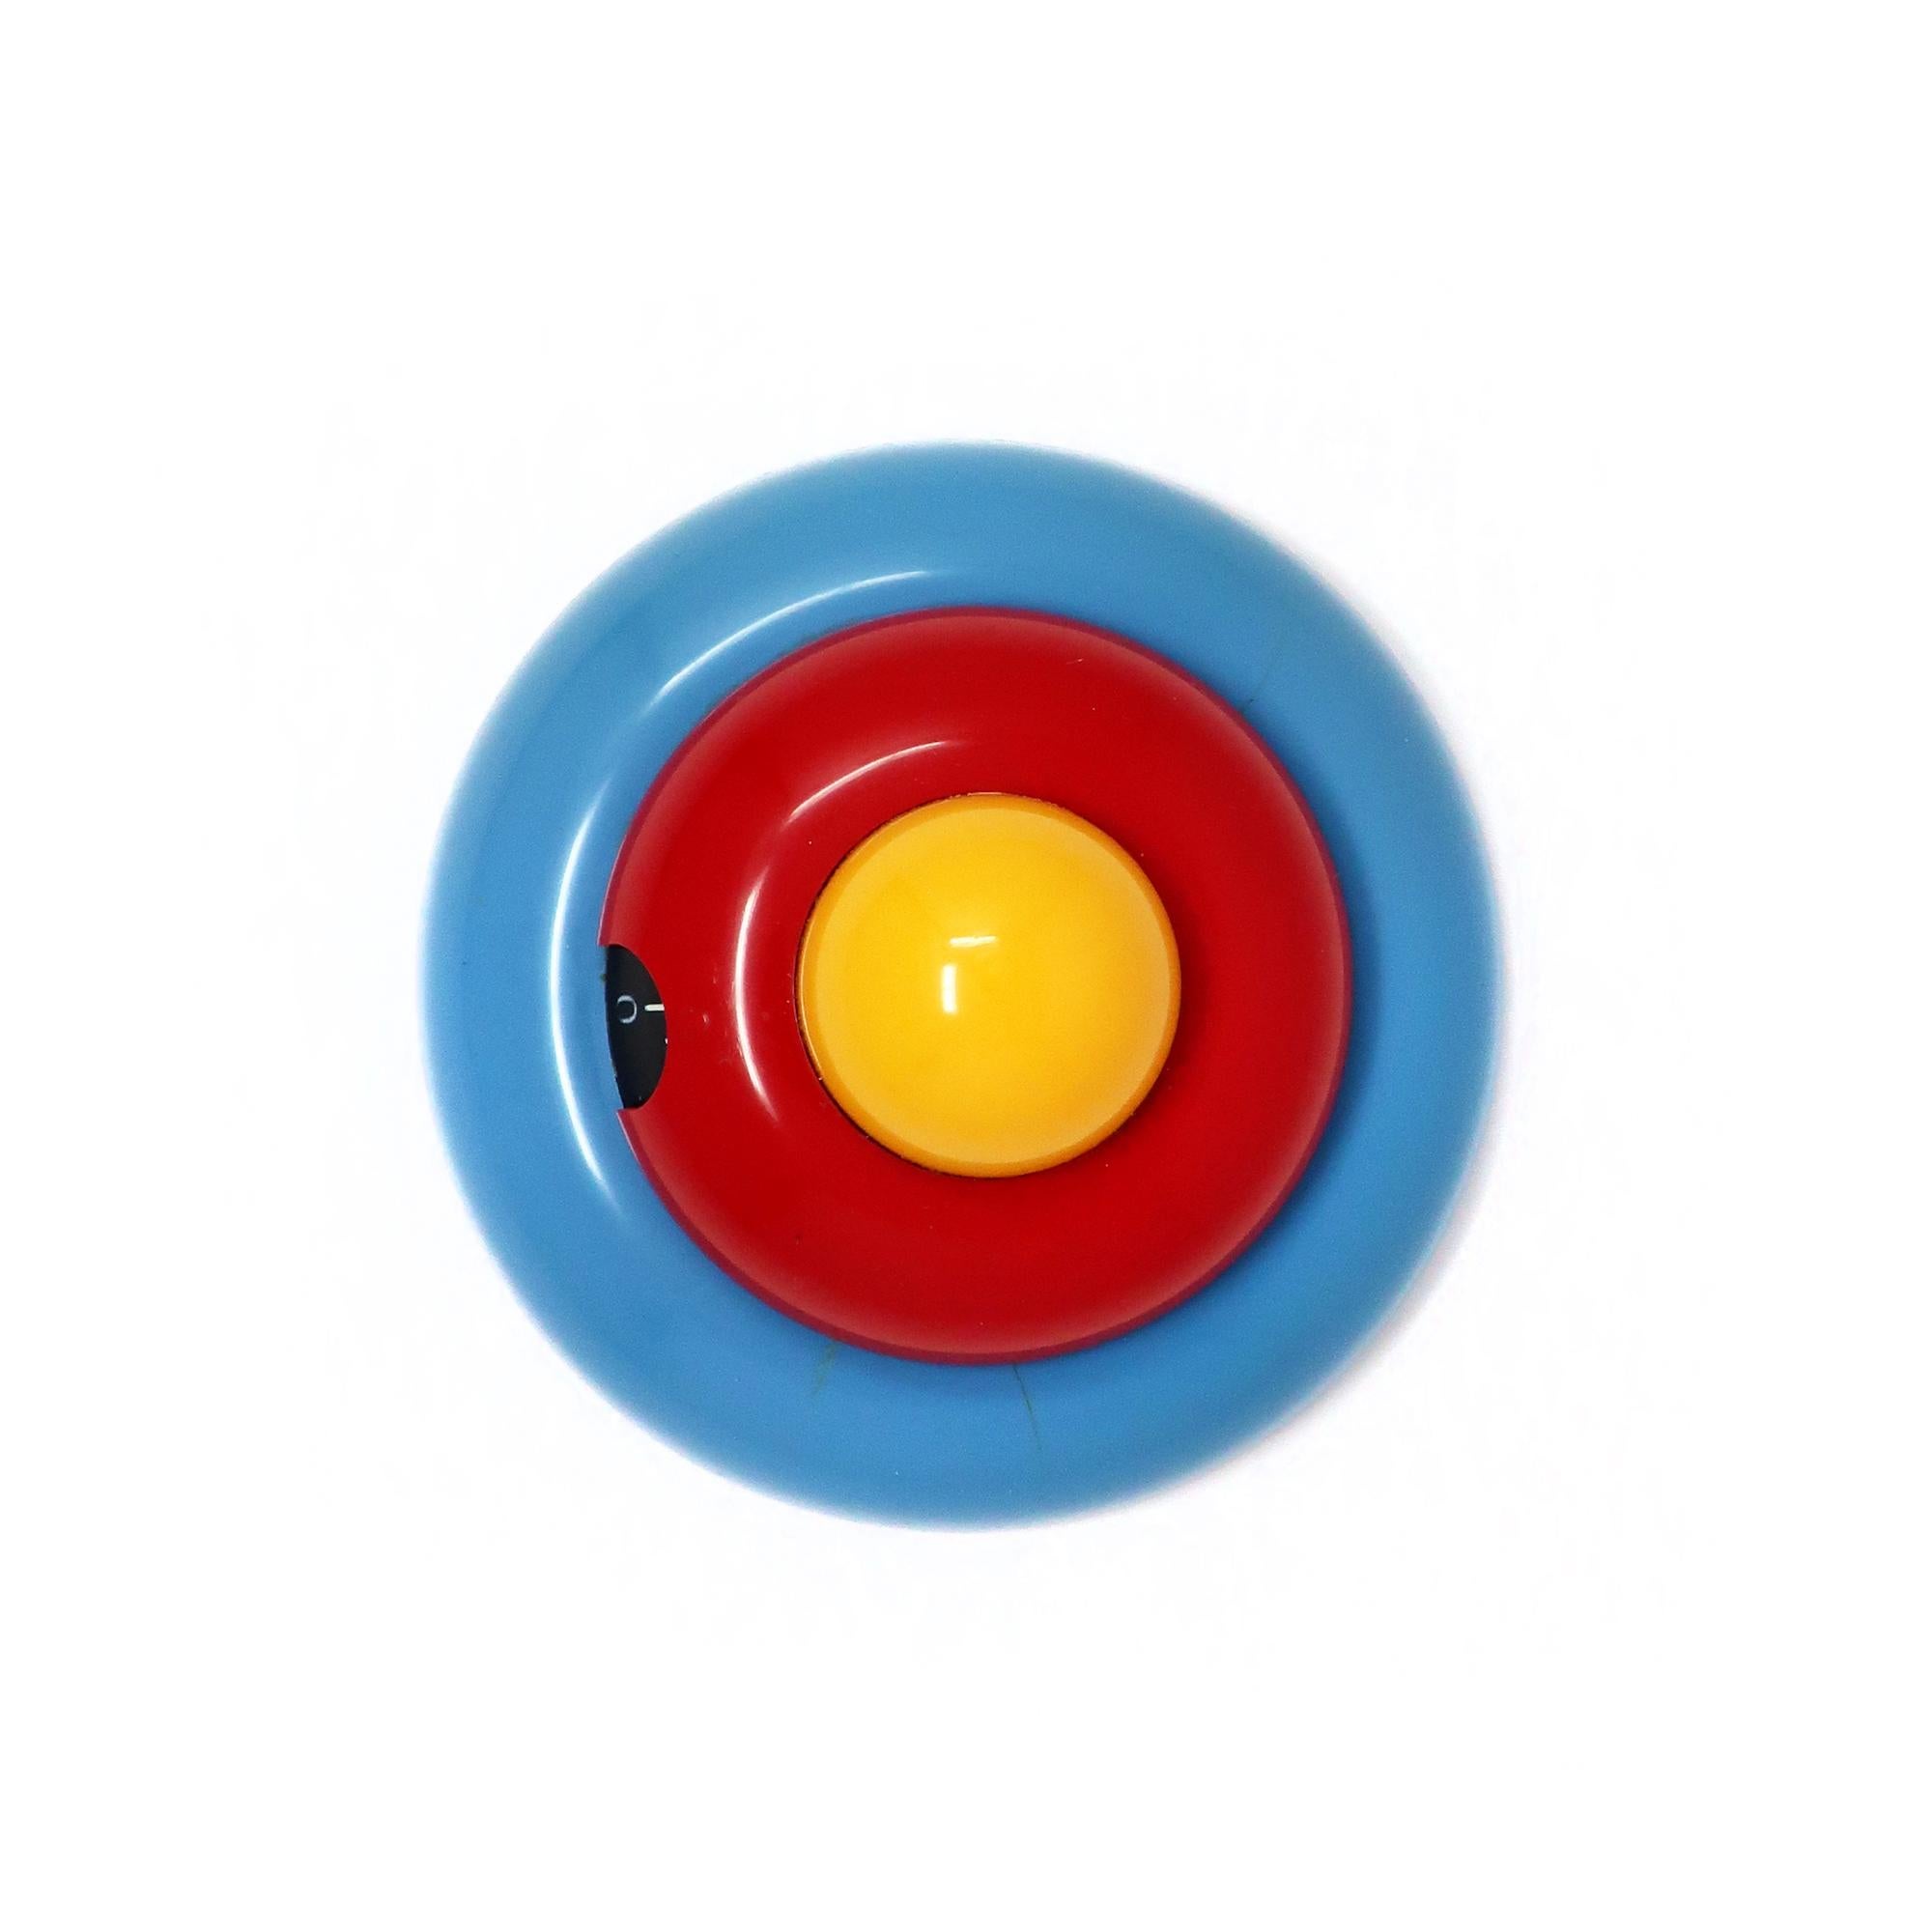 A whimsical Italian postmodern multicolor kitchen timer designed by Roberto Pezzetta for WikiDue.  Stacked light blue, red and yellow discs give it a fun Memphis Milano-inspried take on an egg in a pan.  Runs for up to 60 minutes.

In good vintage